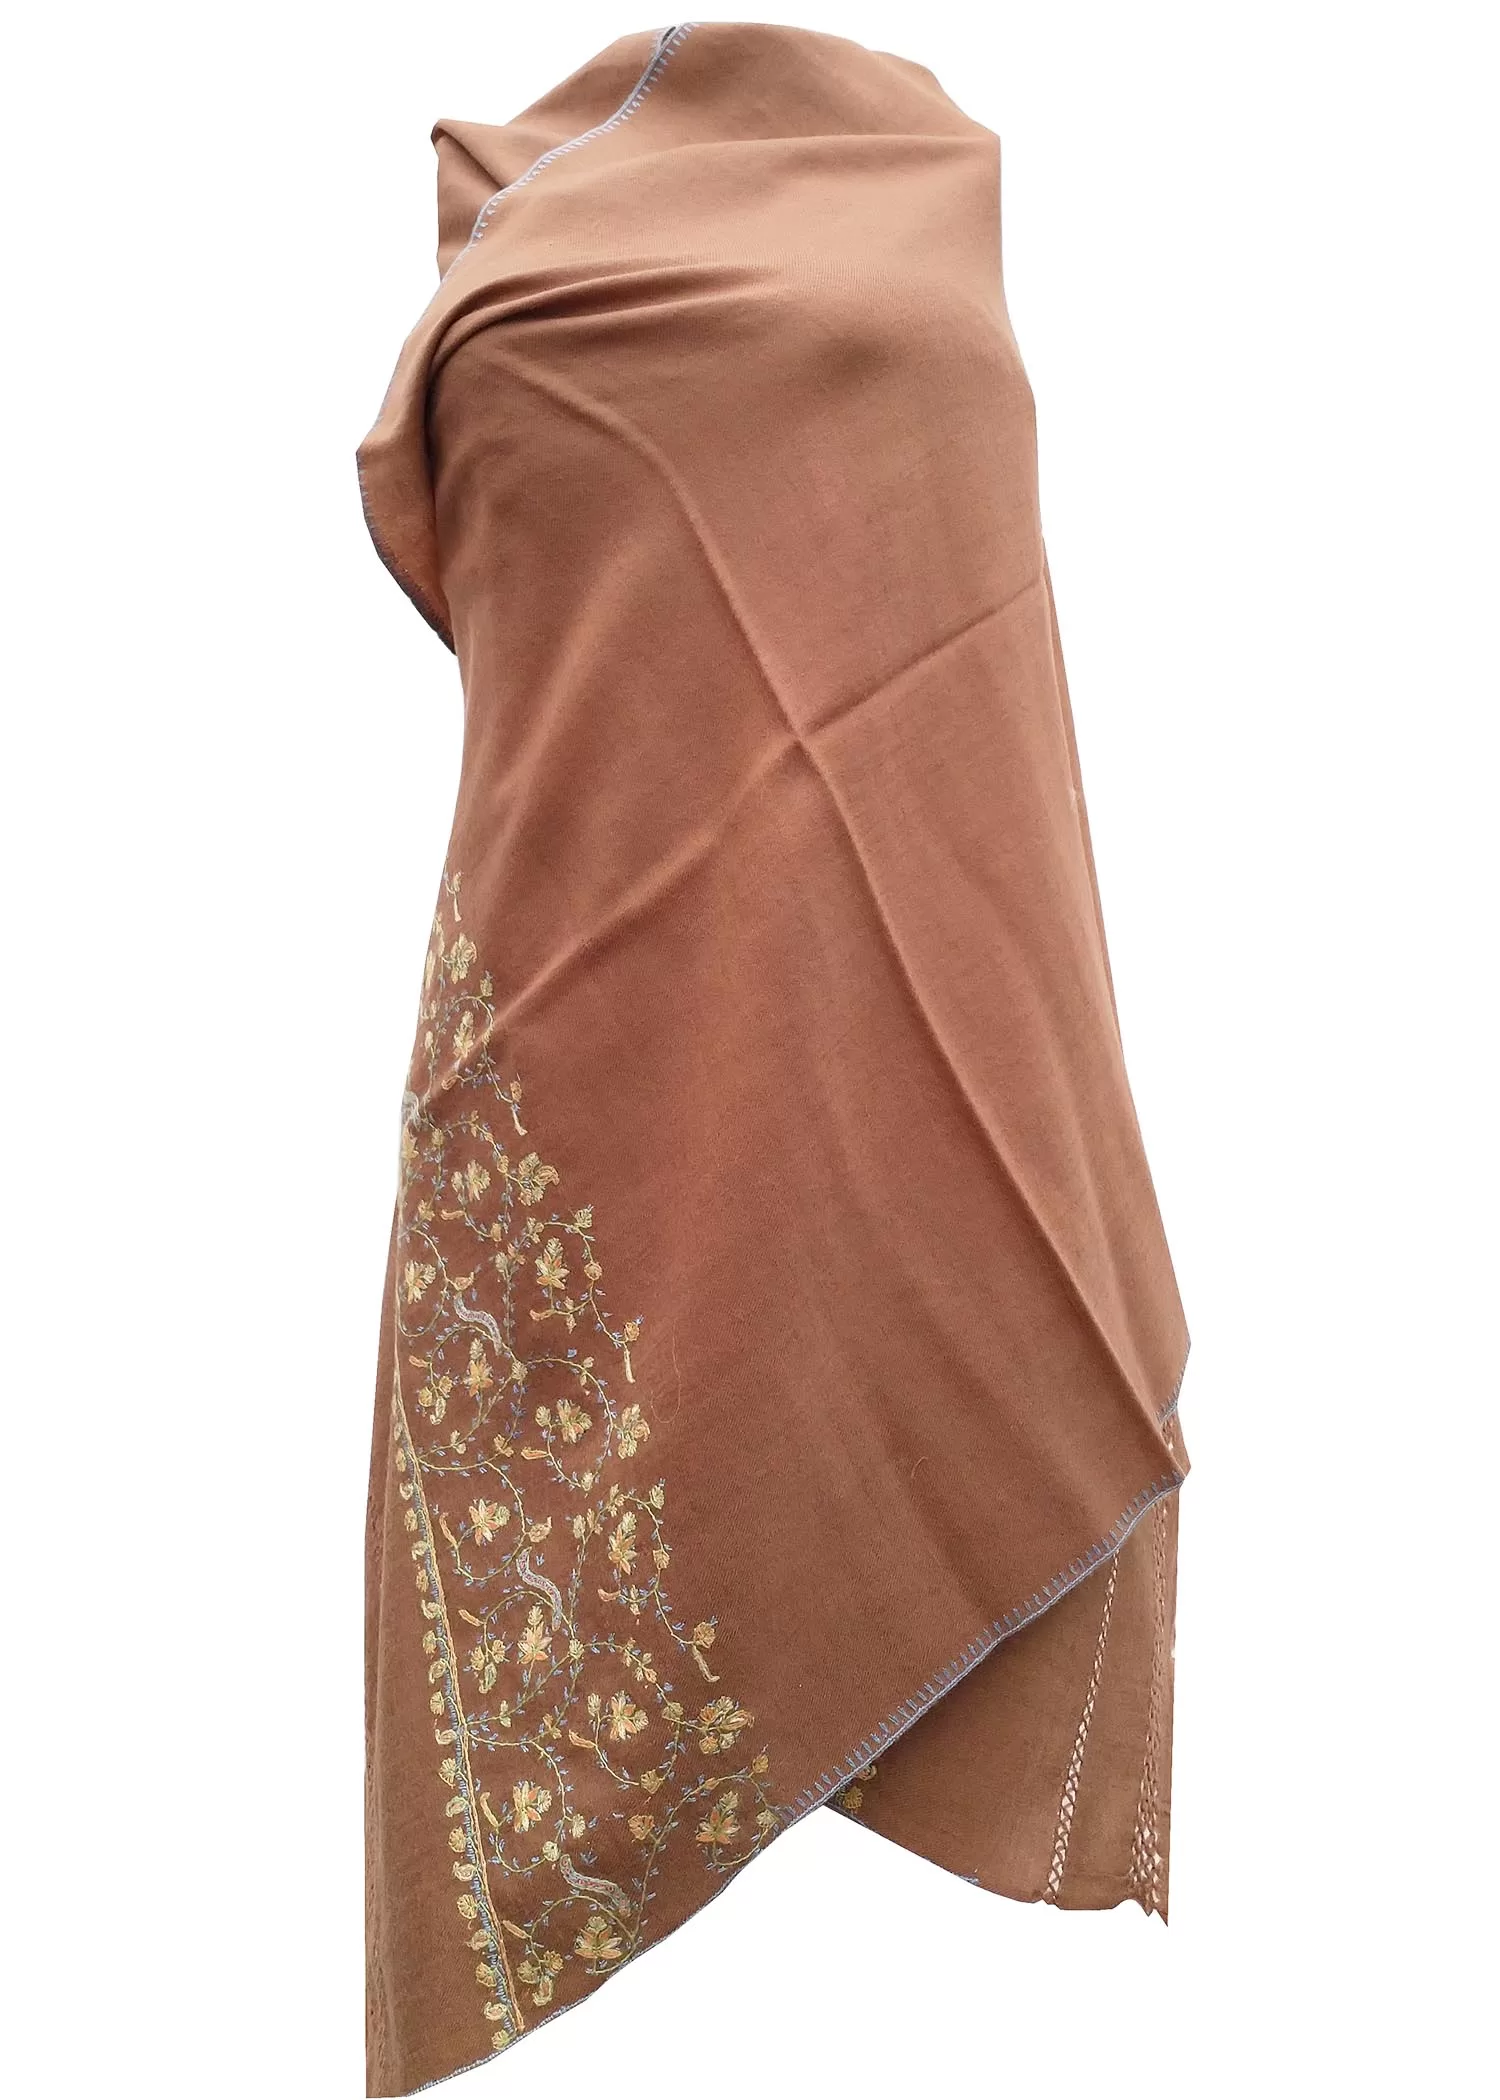 brown color woolen stole with embroidery